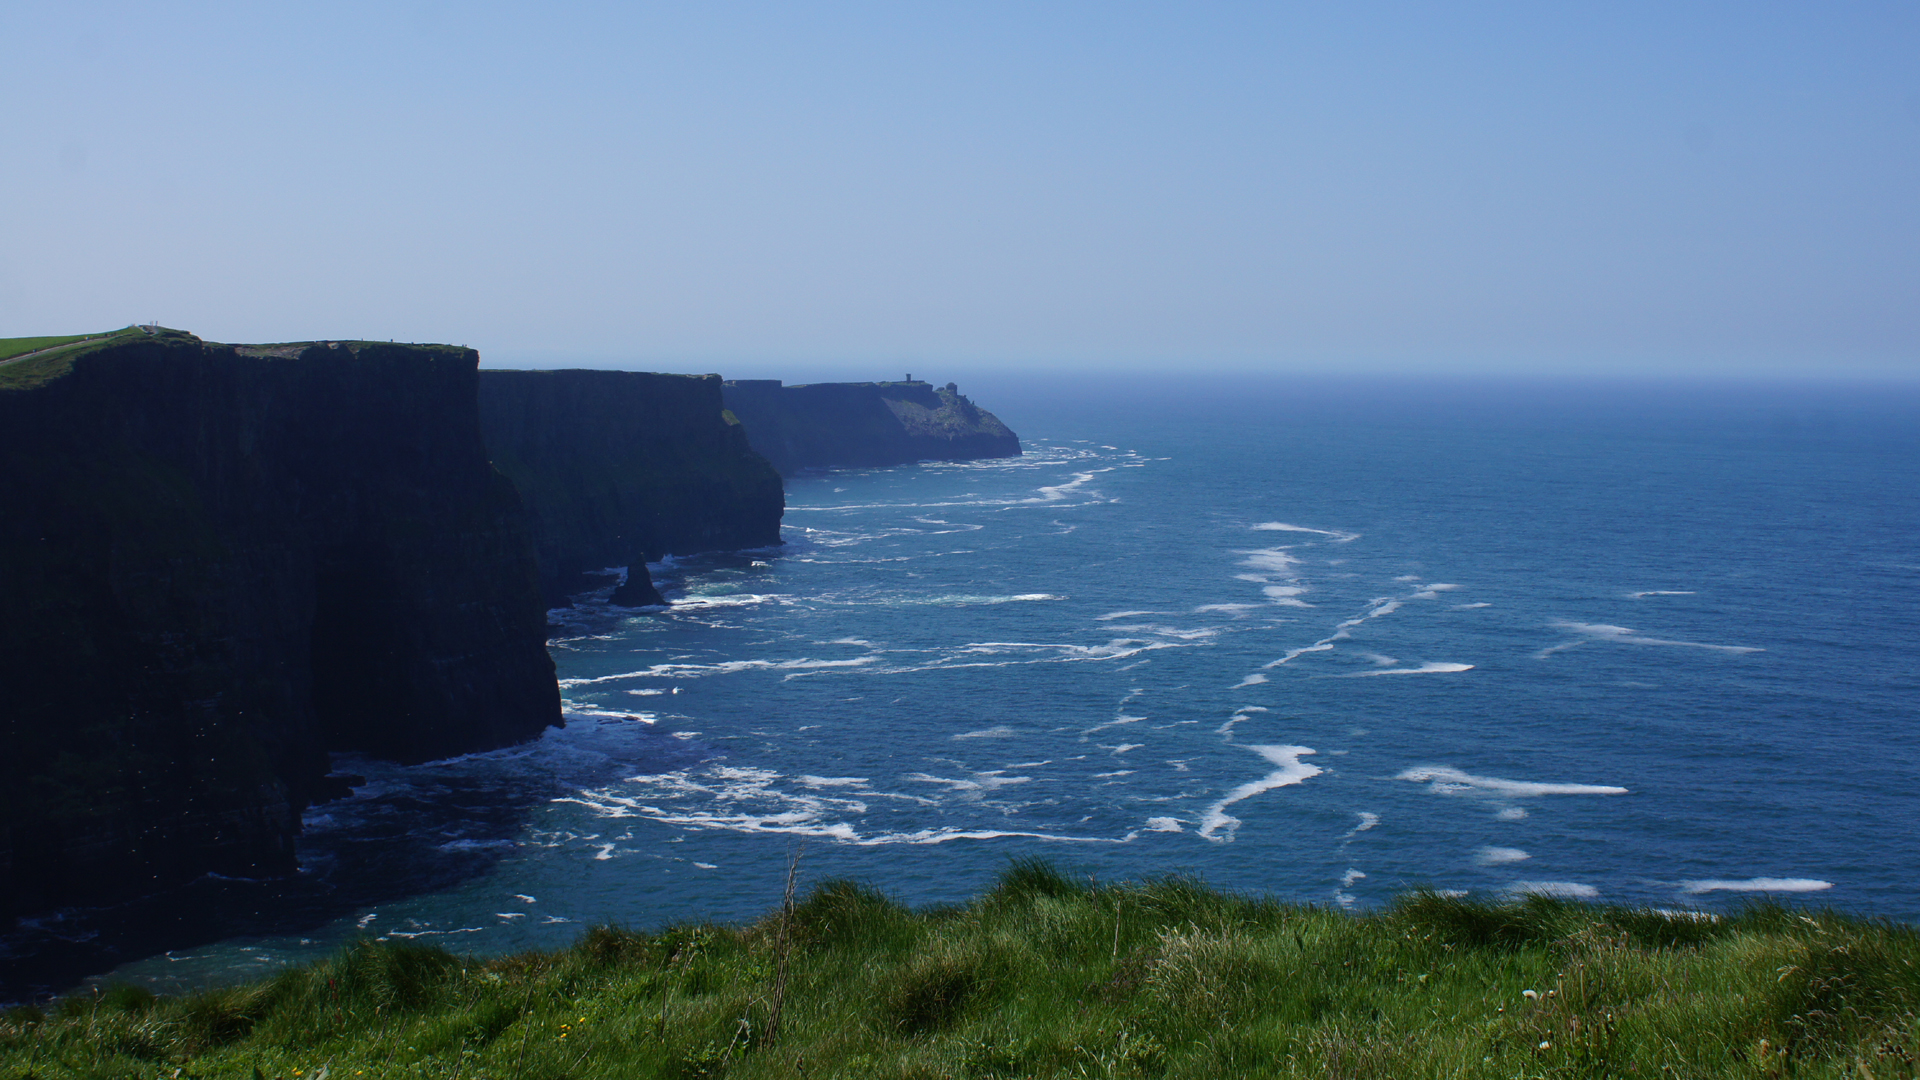 Irland 01: Cliffs of Moher